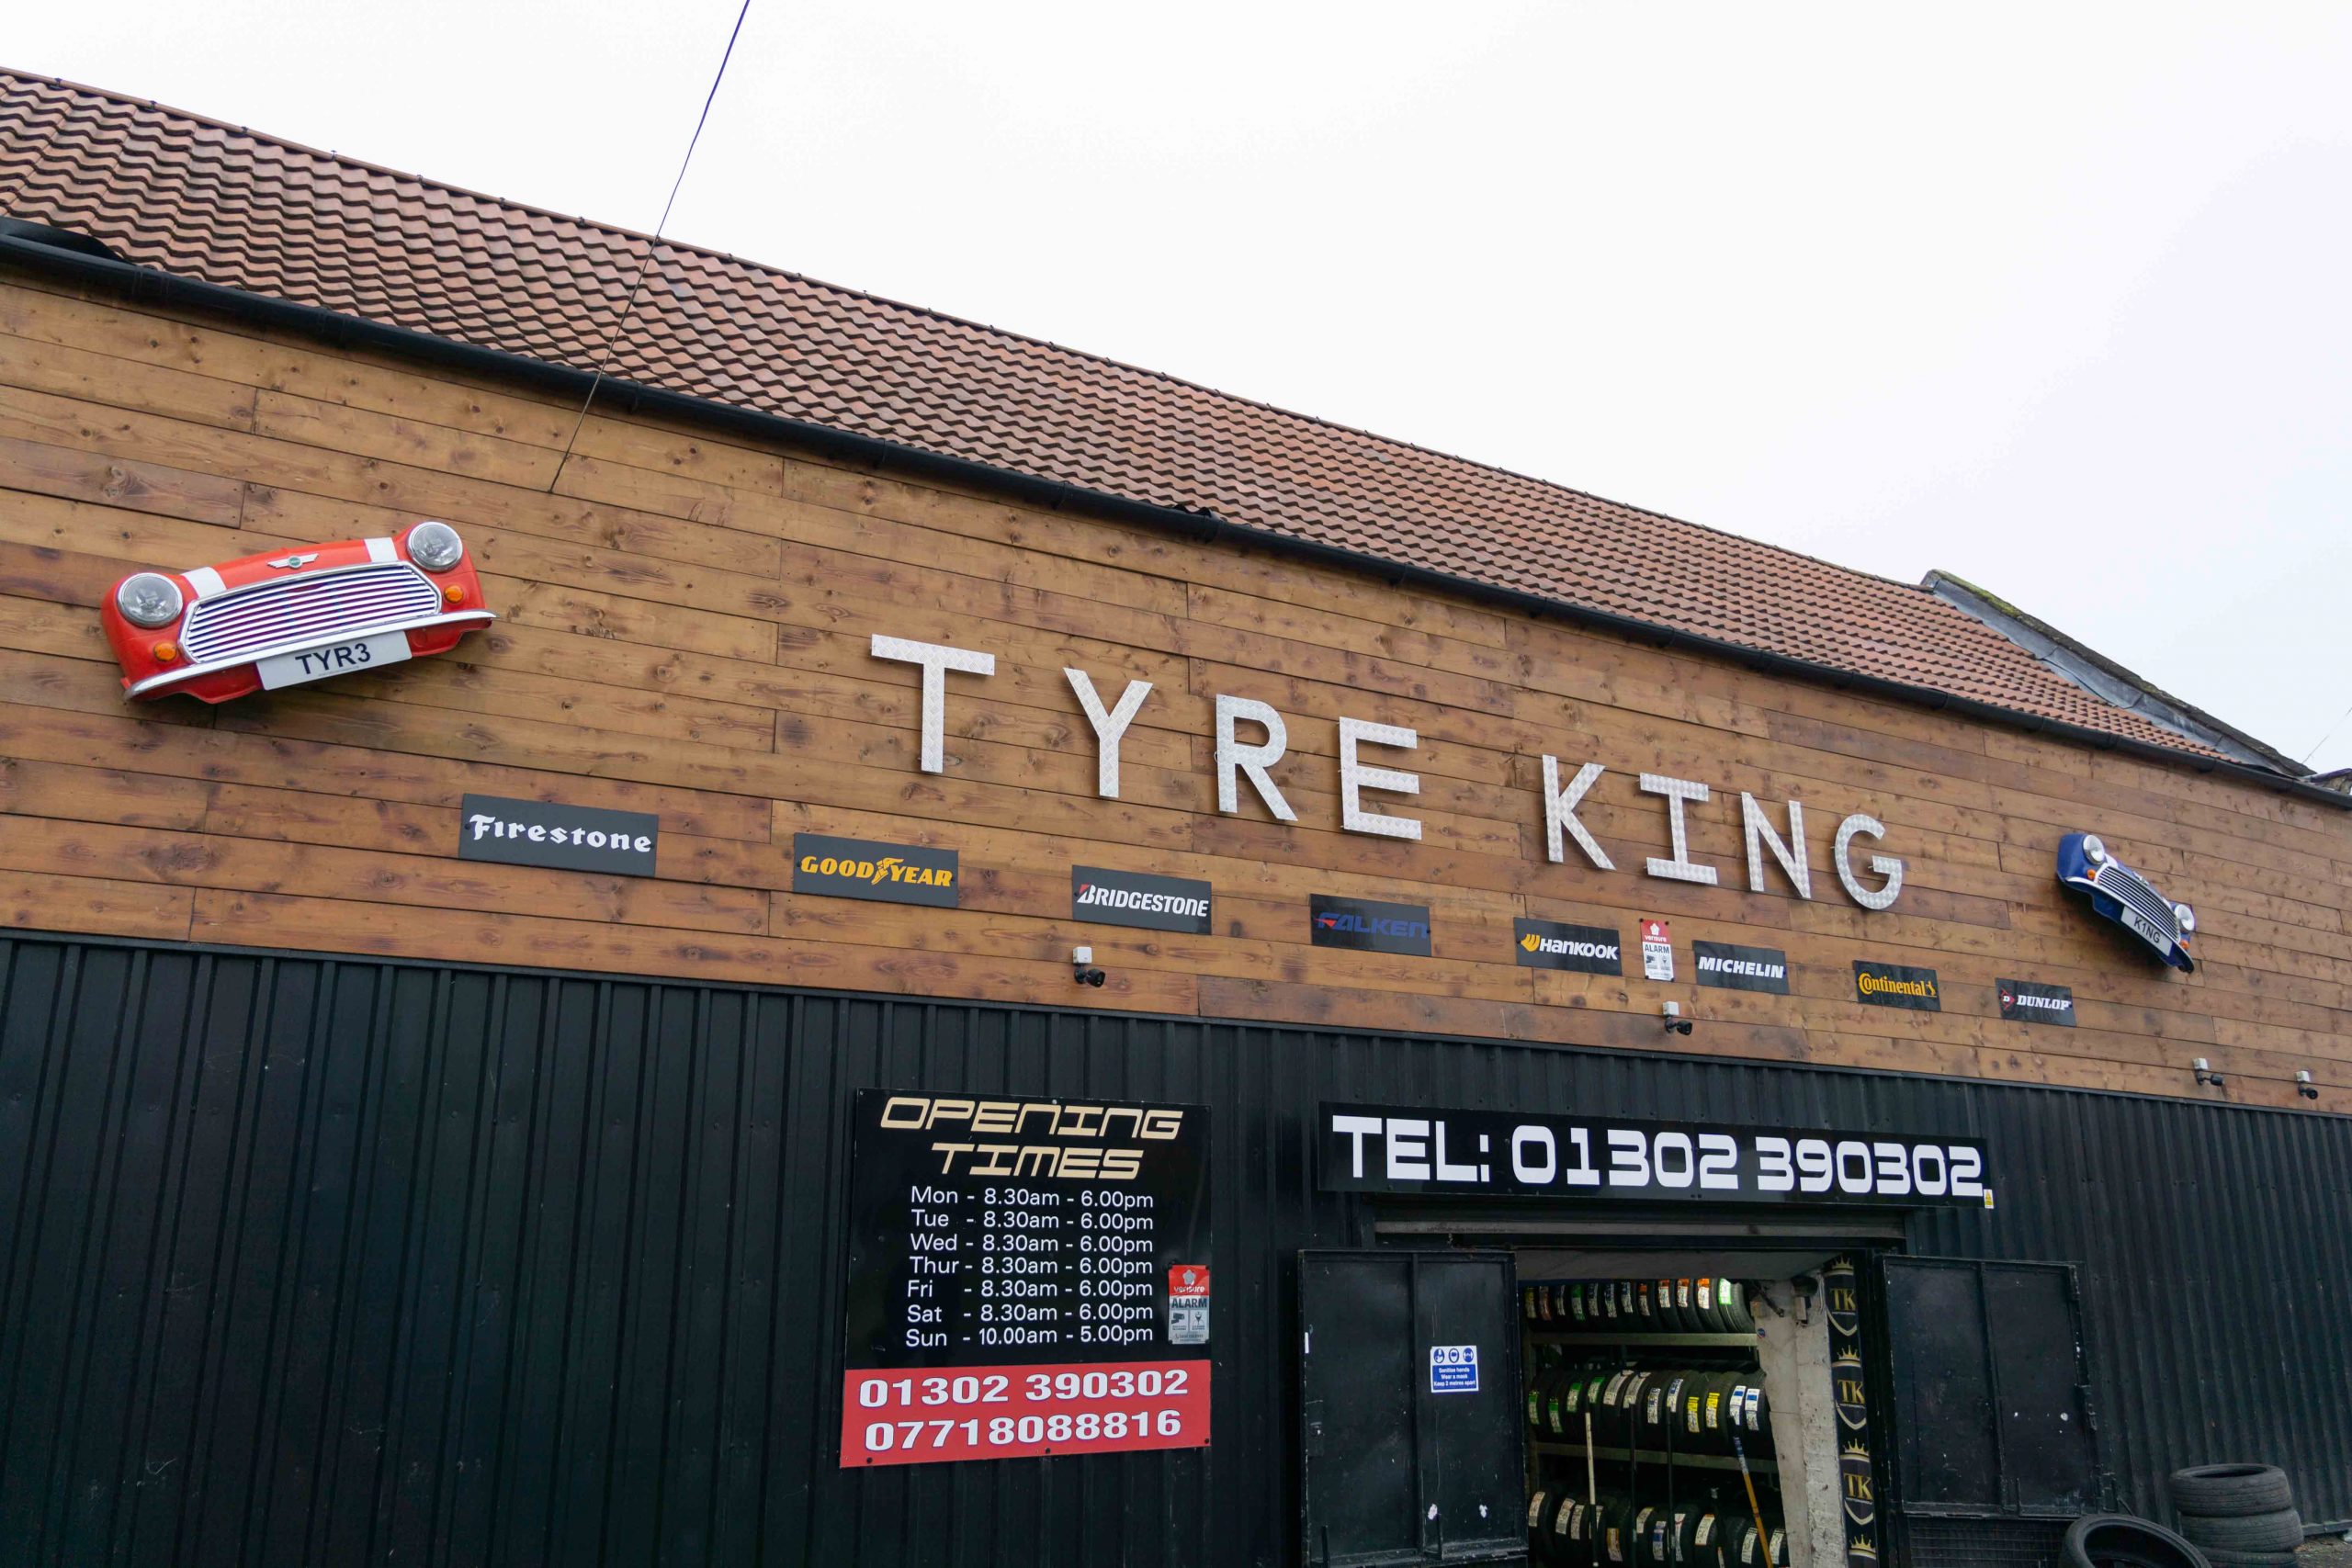 Tyre King Donington building outside